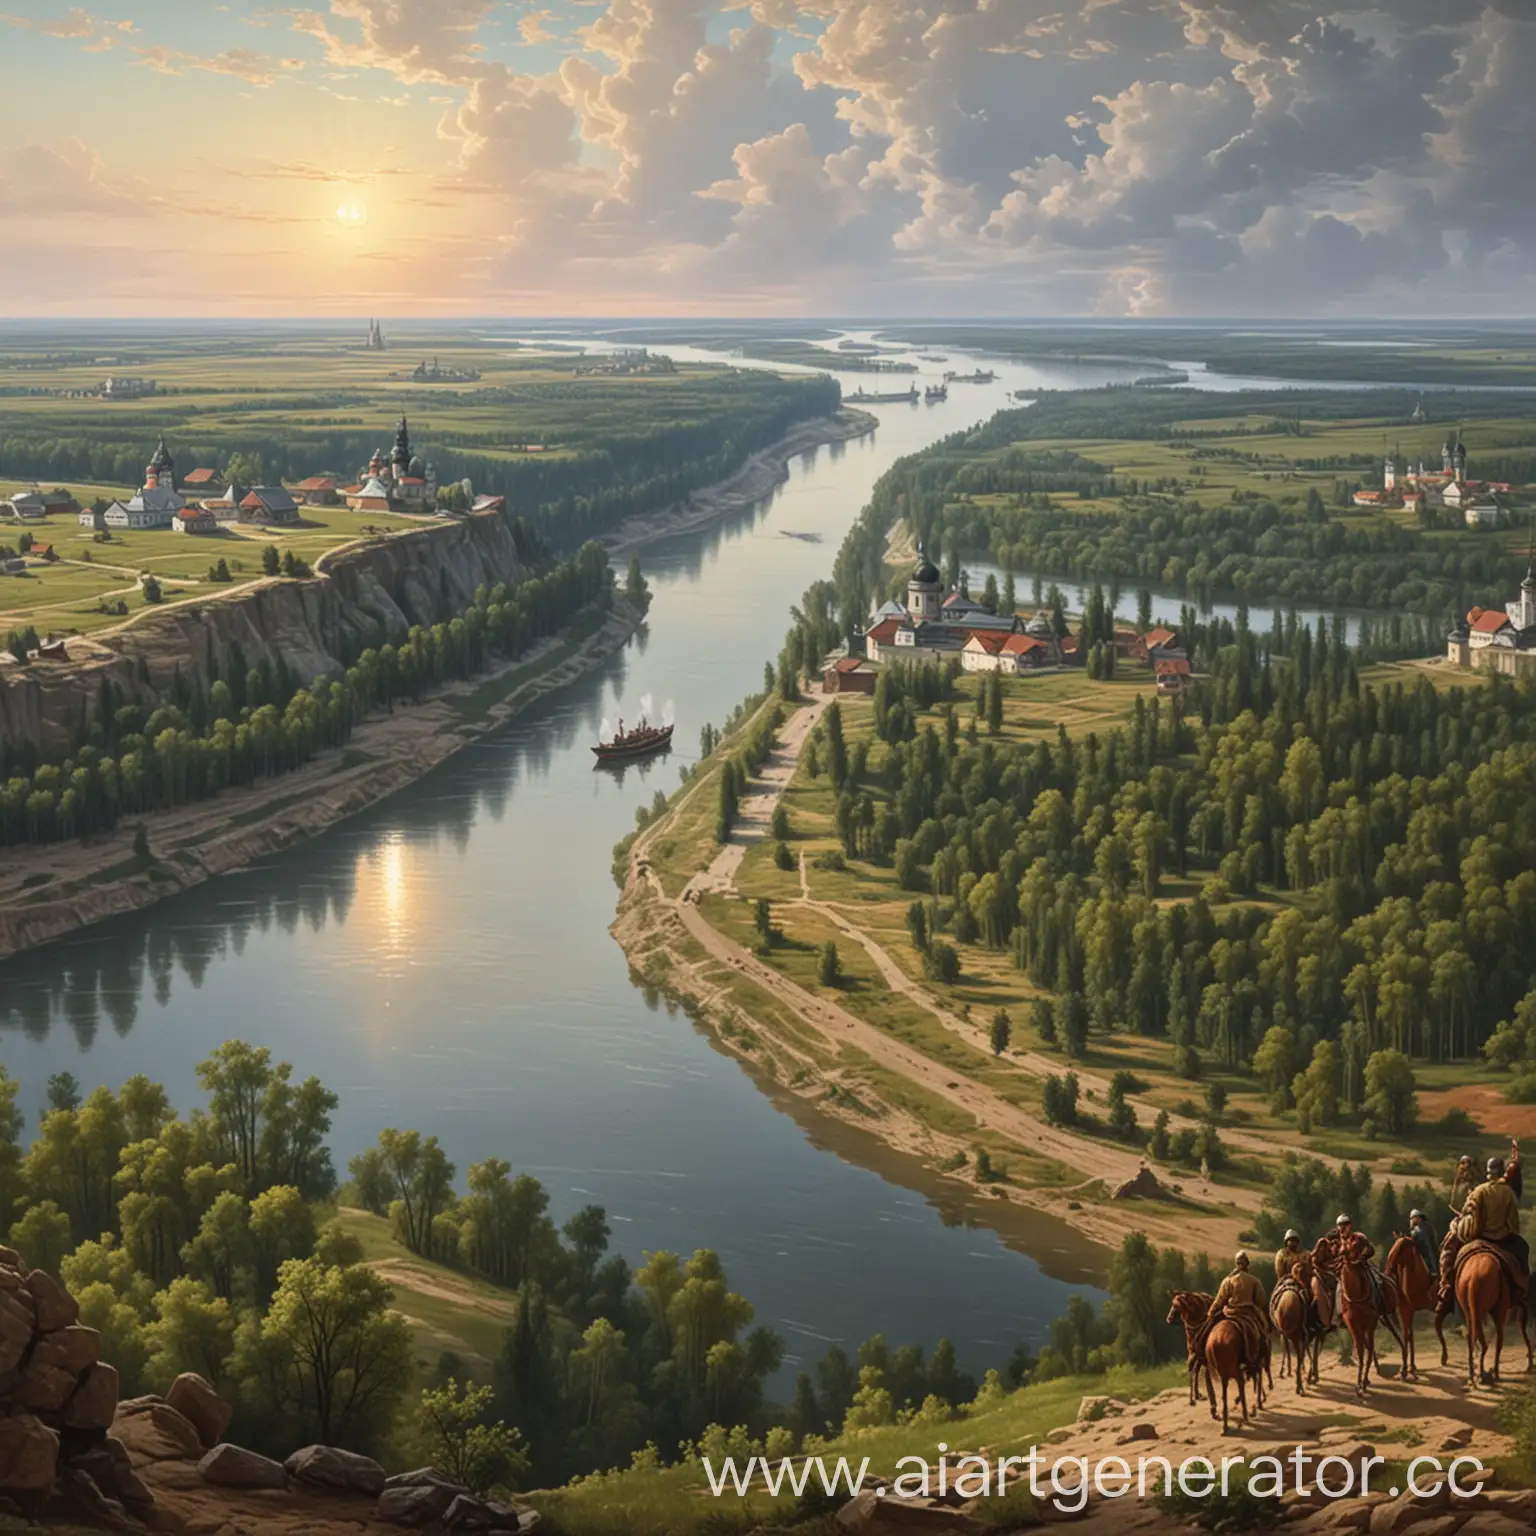 Formation-of-the-Volga-River-A-Historical-Journey-Through-Time